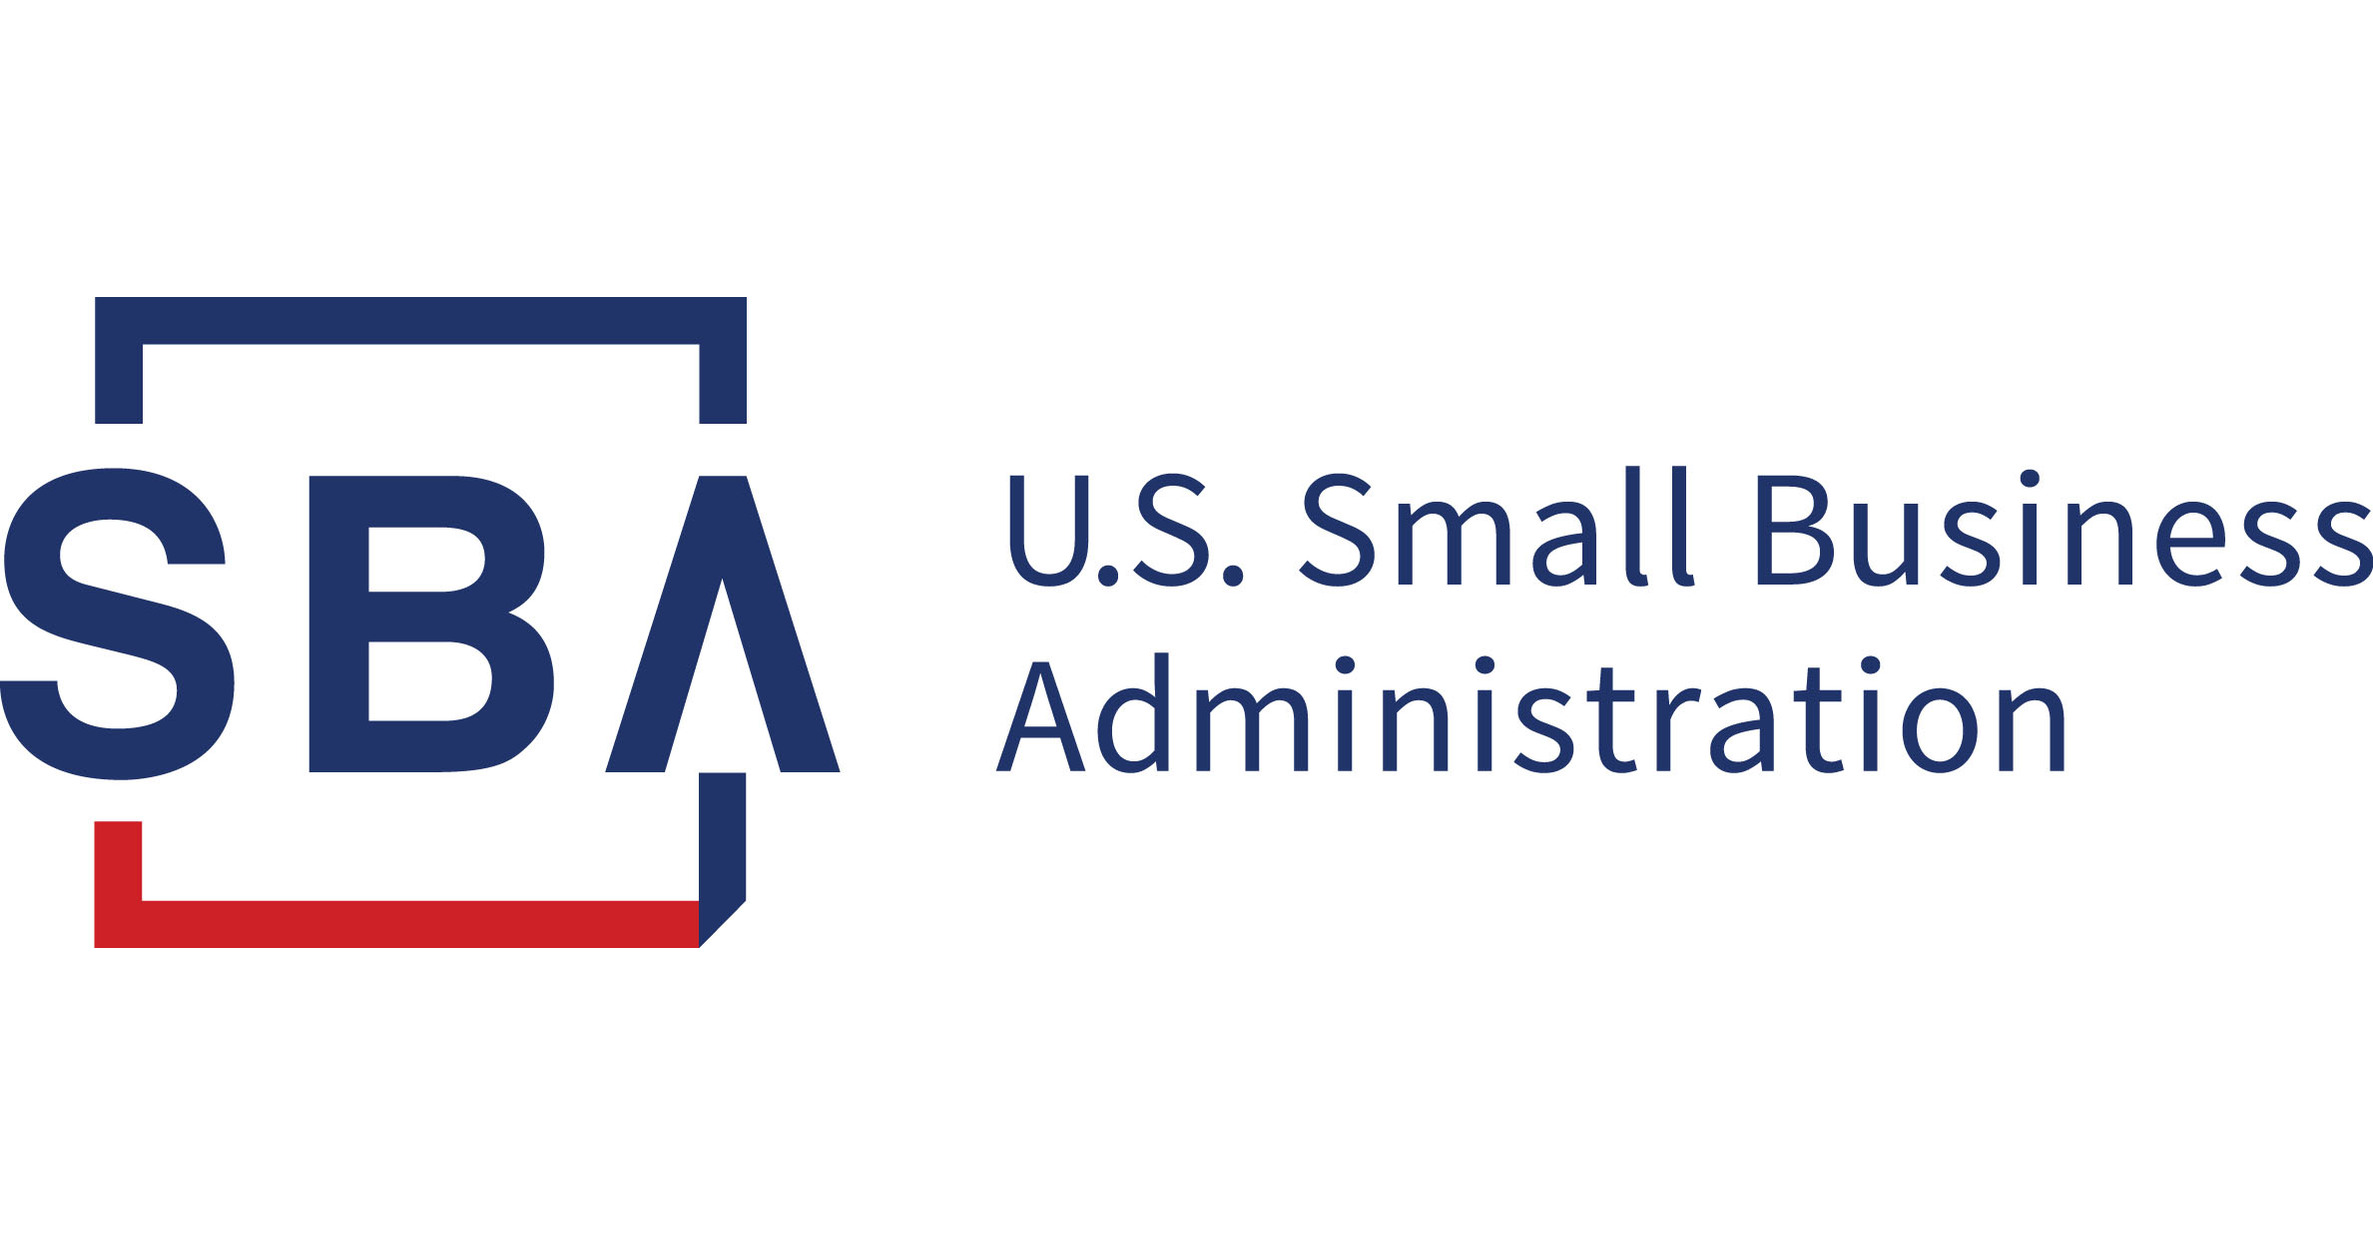 Small Business Facts: Small Business Innovation Measured by Patenting Activity